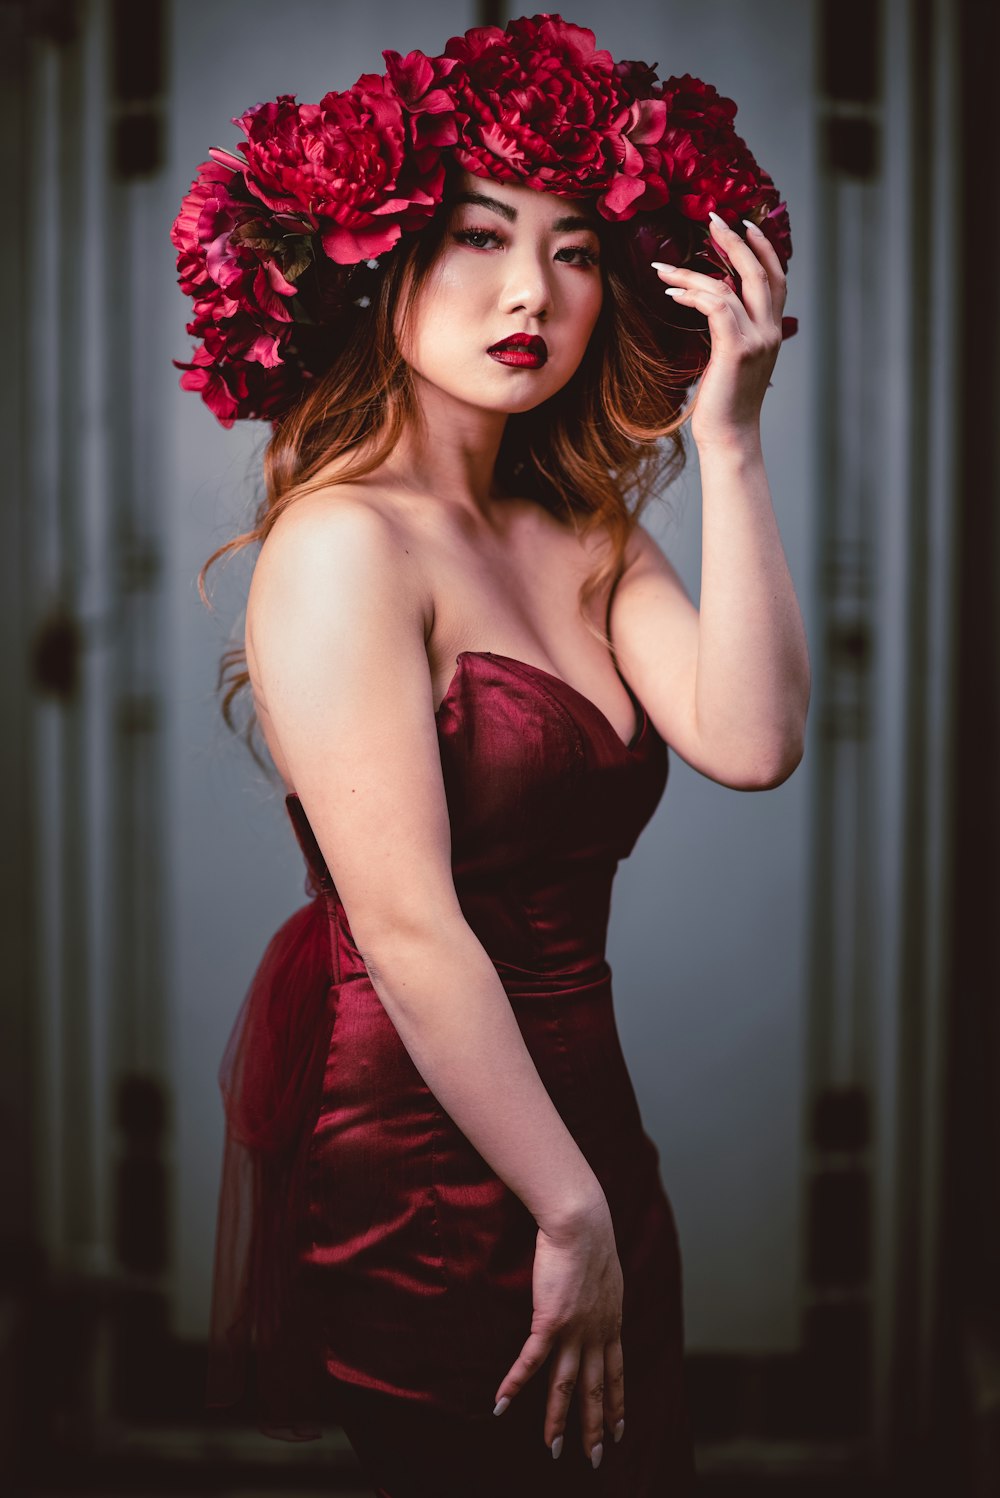 woman in red tube dress holding red flower